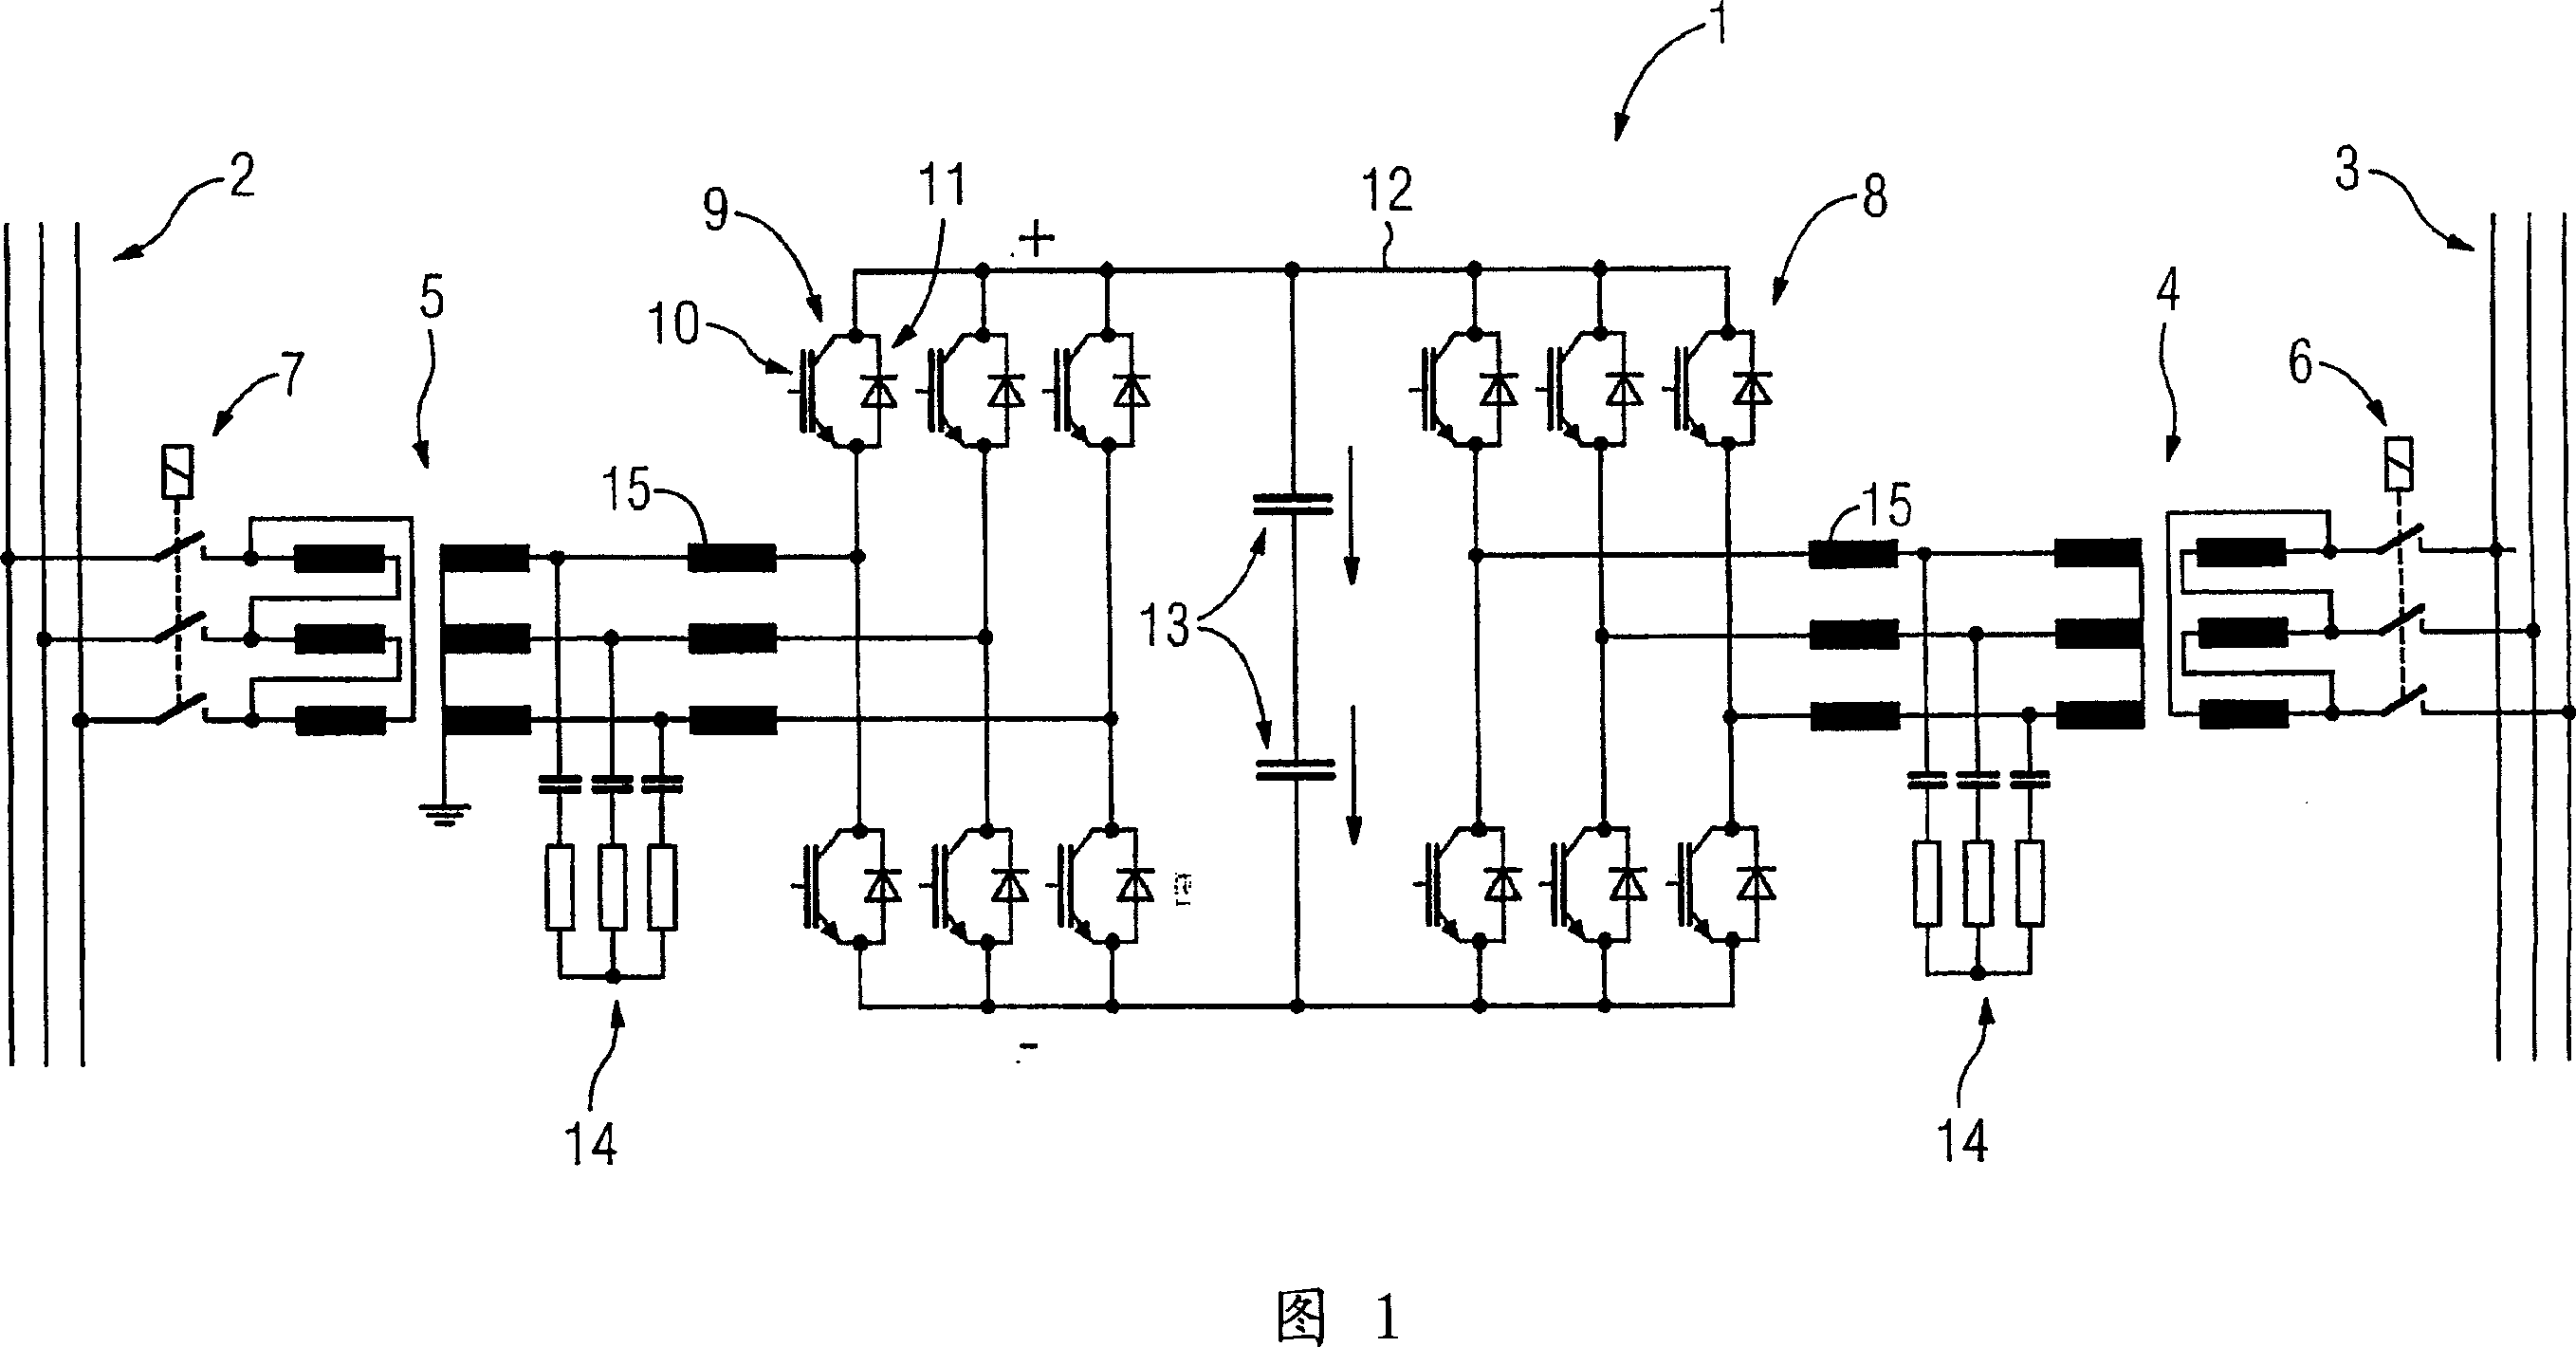 Method for controlling an electronic power converter that is connected to a direct-current source